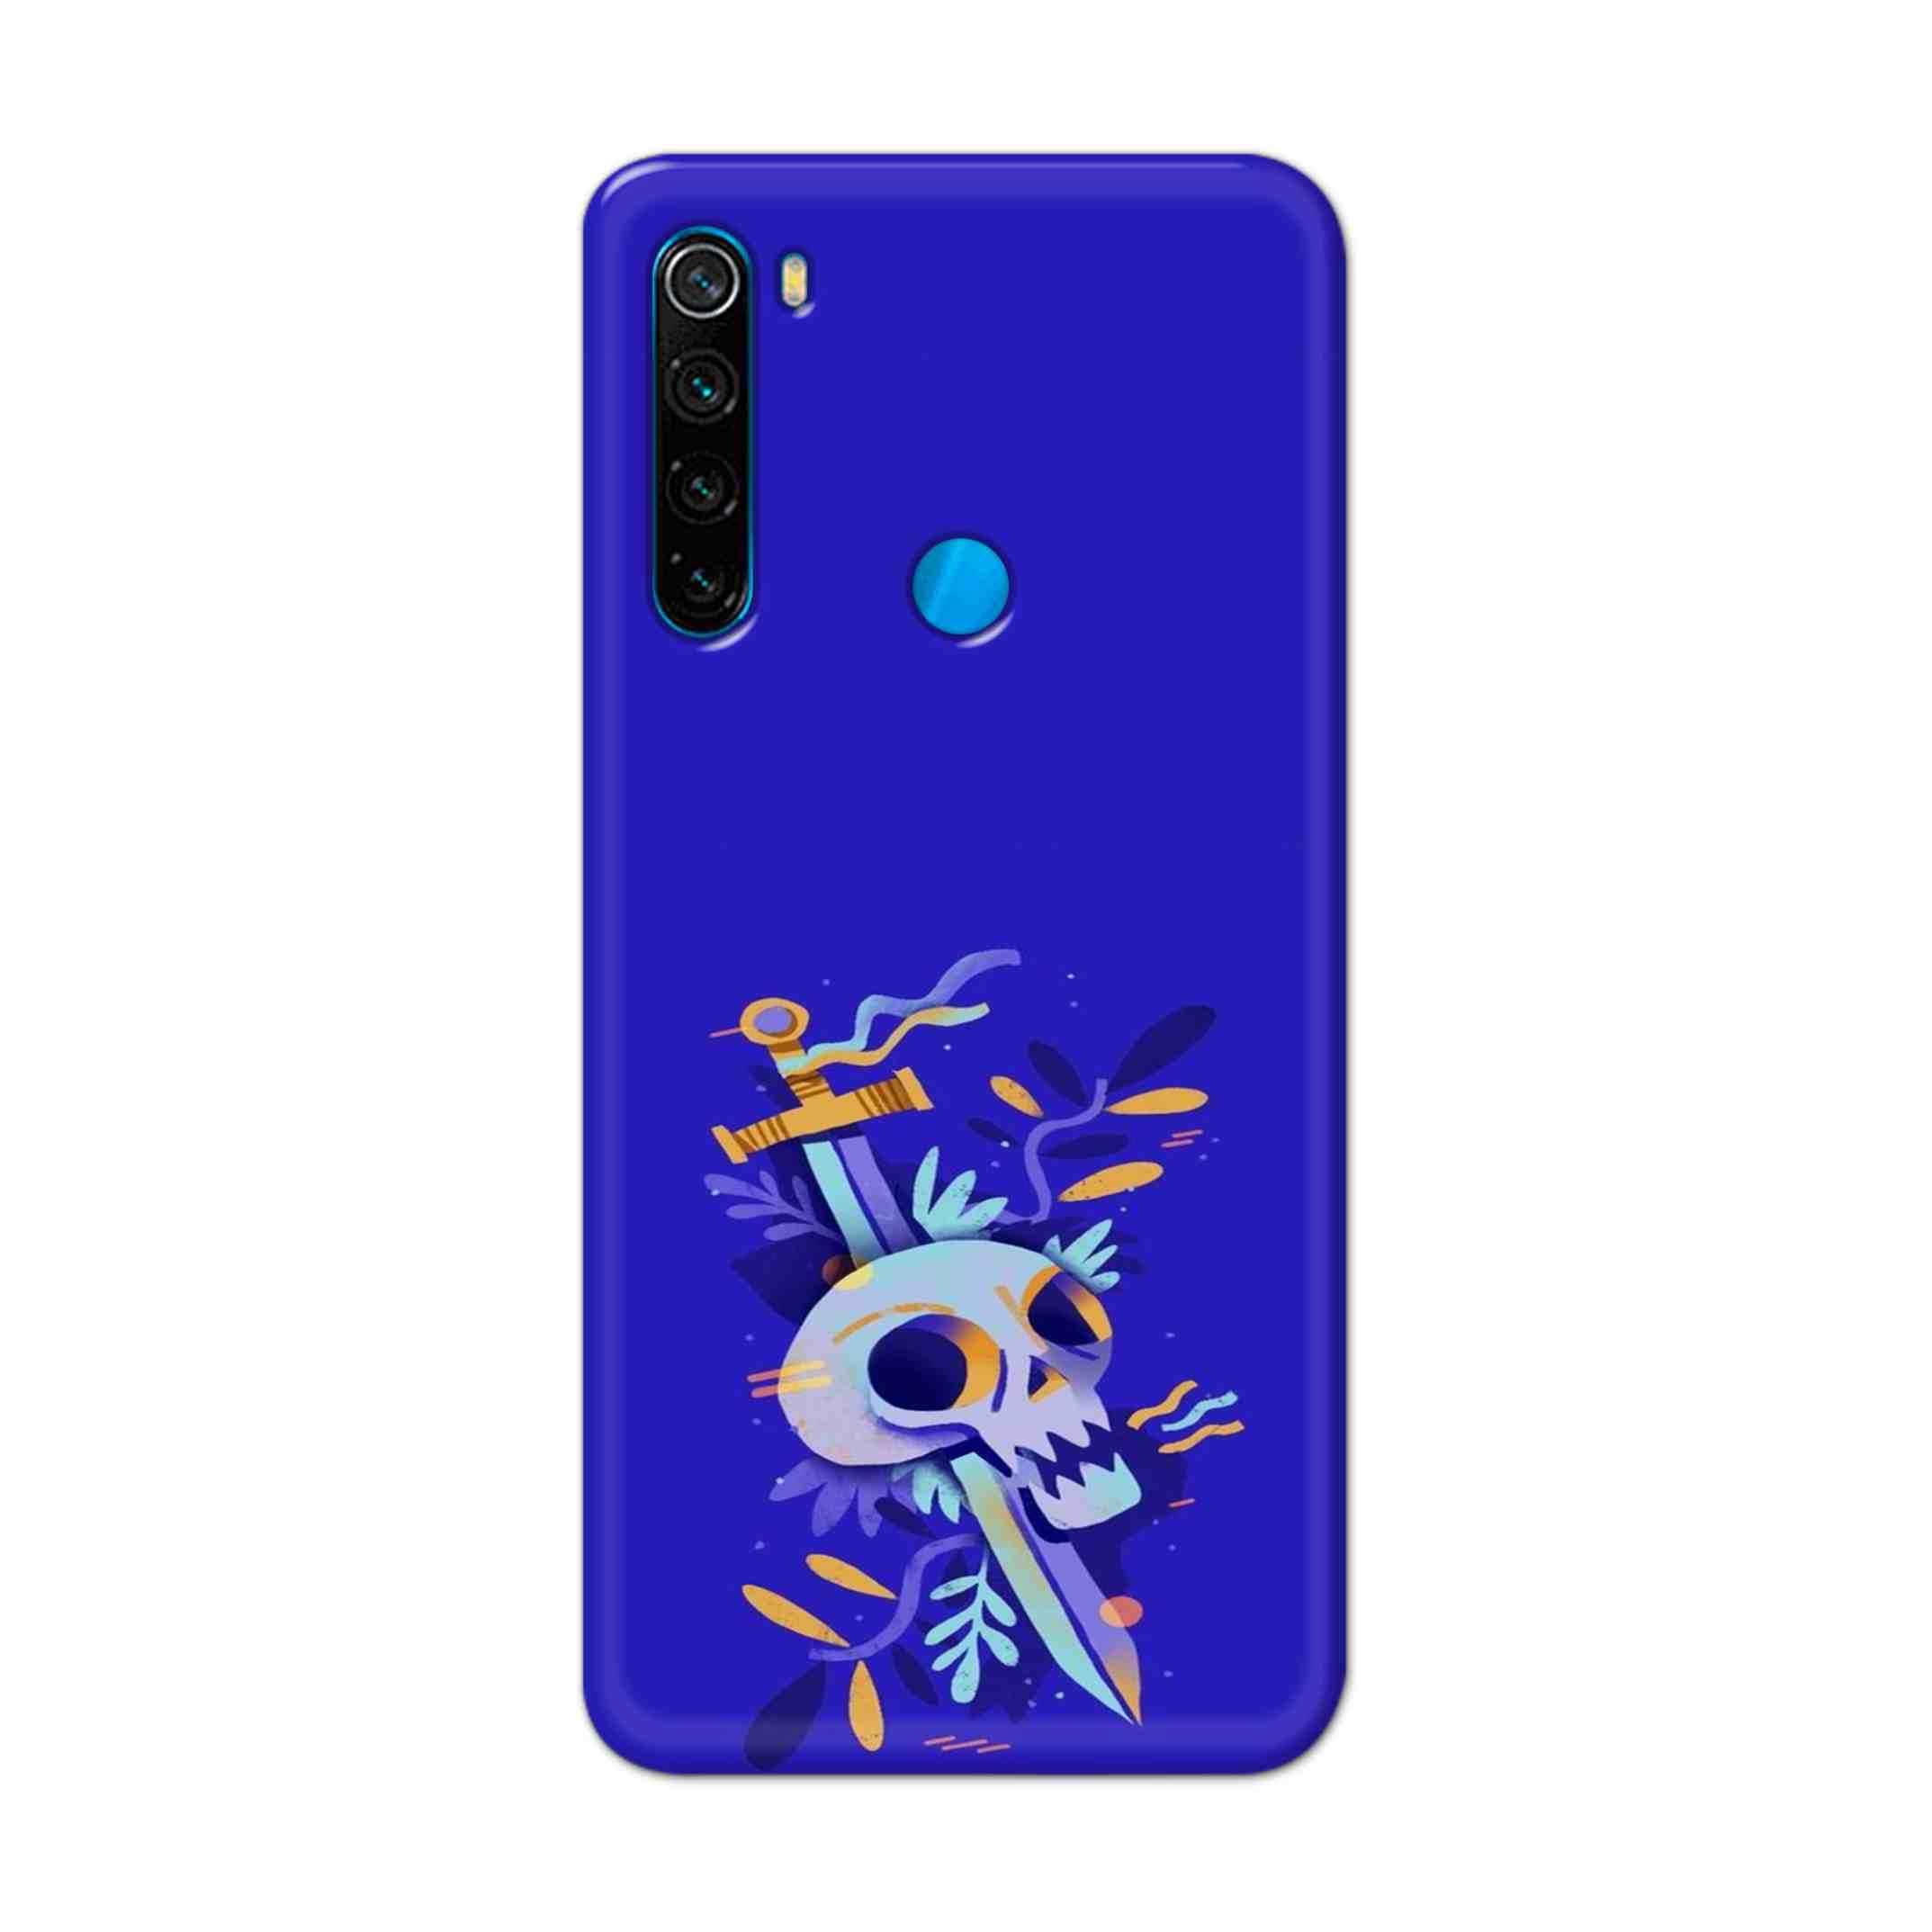 Buy Blue Skull Hard Back Mobile Phone Case Cover For Xiaomi Redmi Note 8 Online